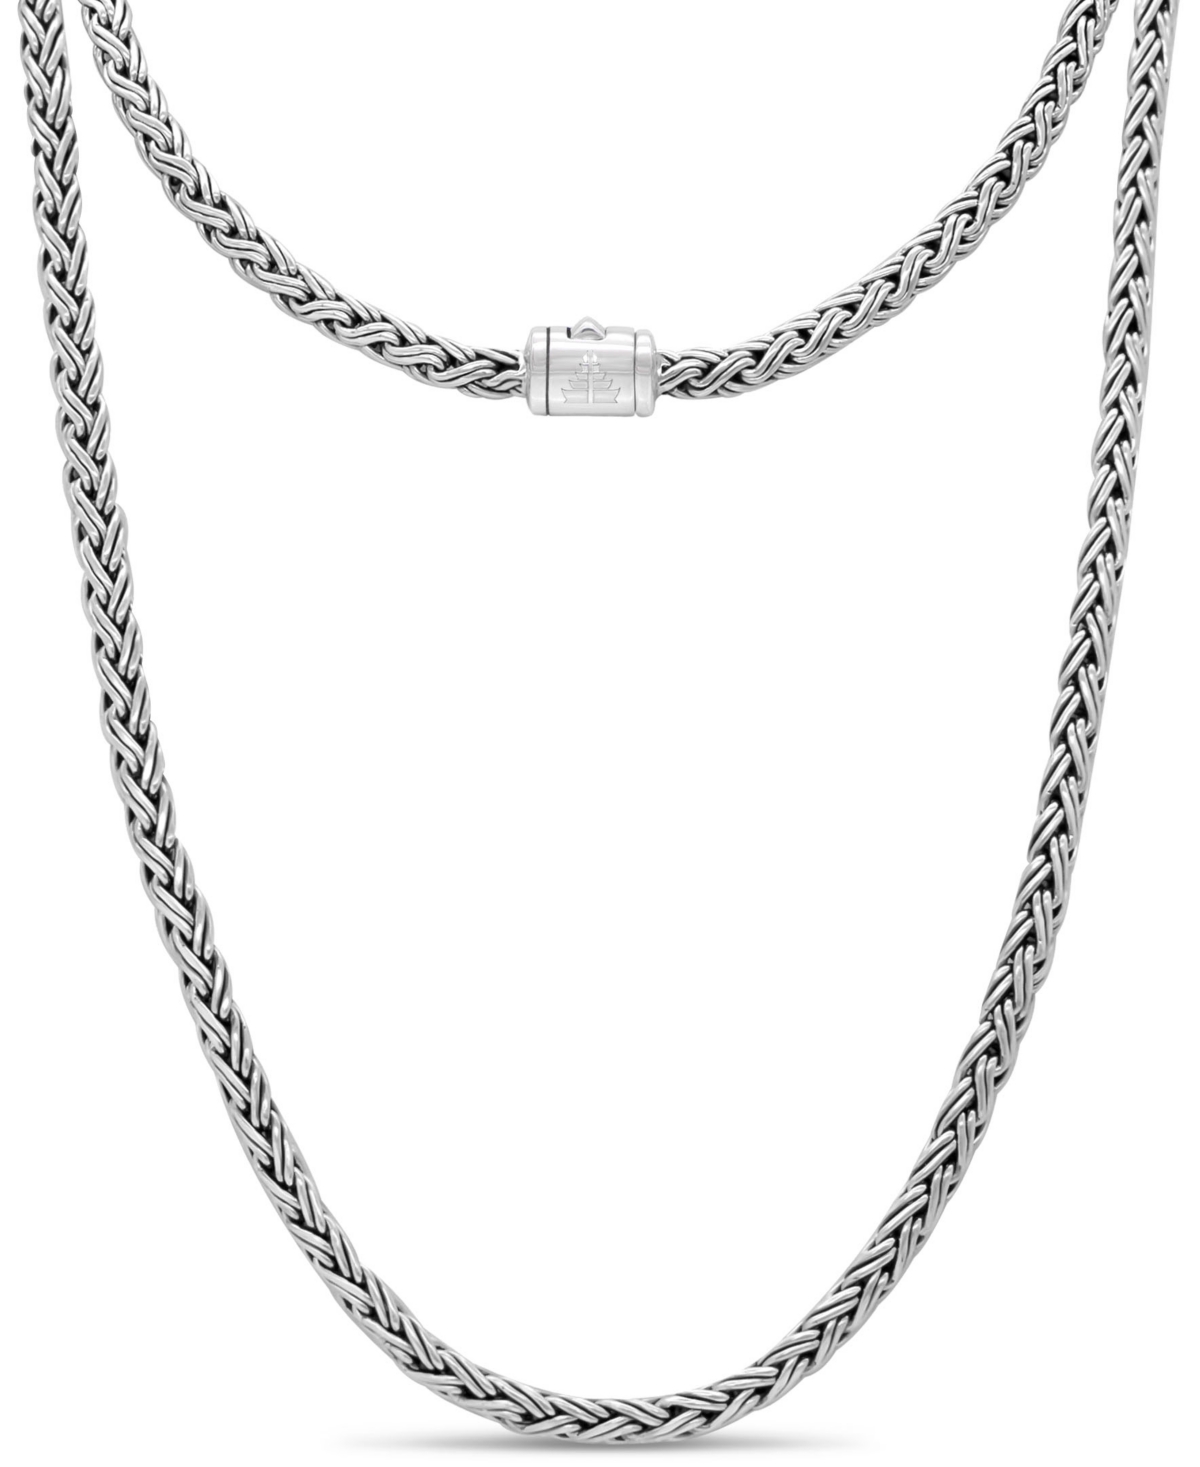 Paddy Oval 5mm Chain Necklace in Sterling Silver - Silver